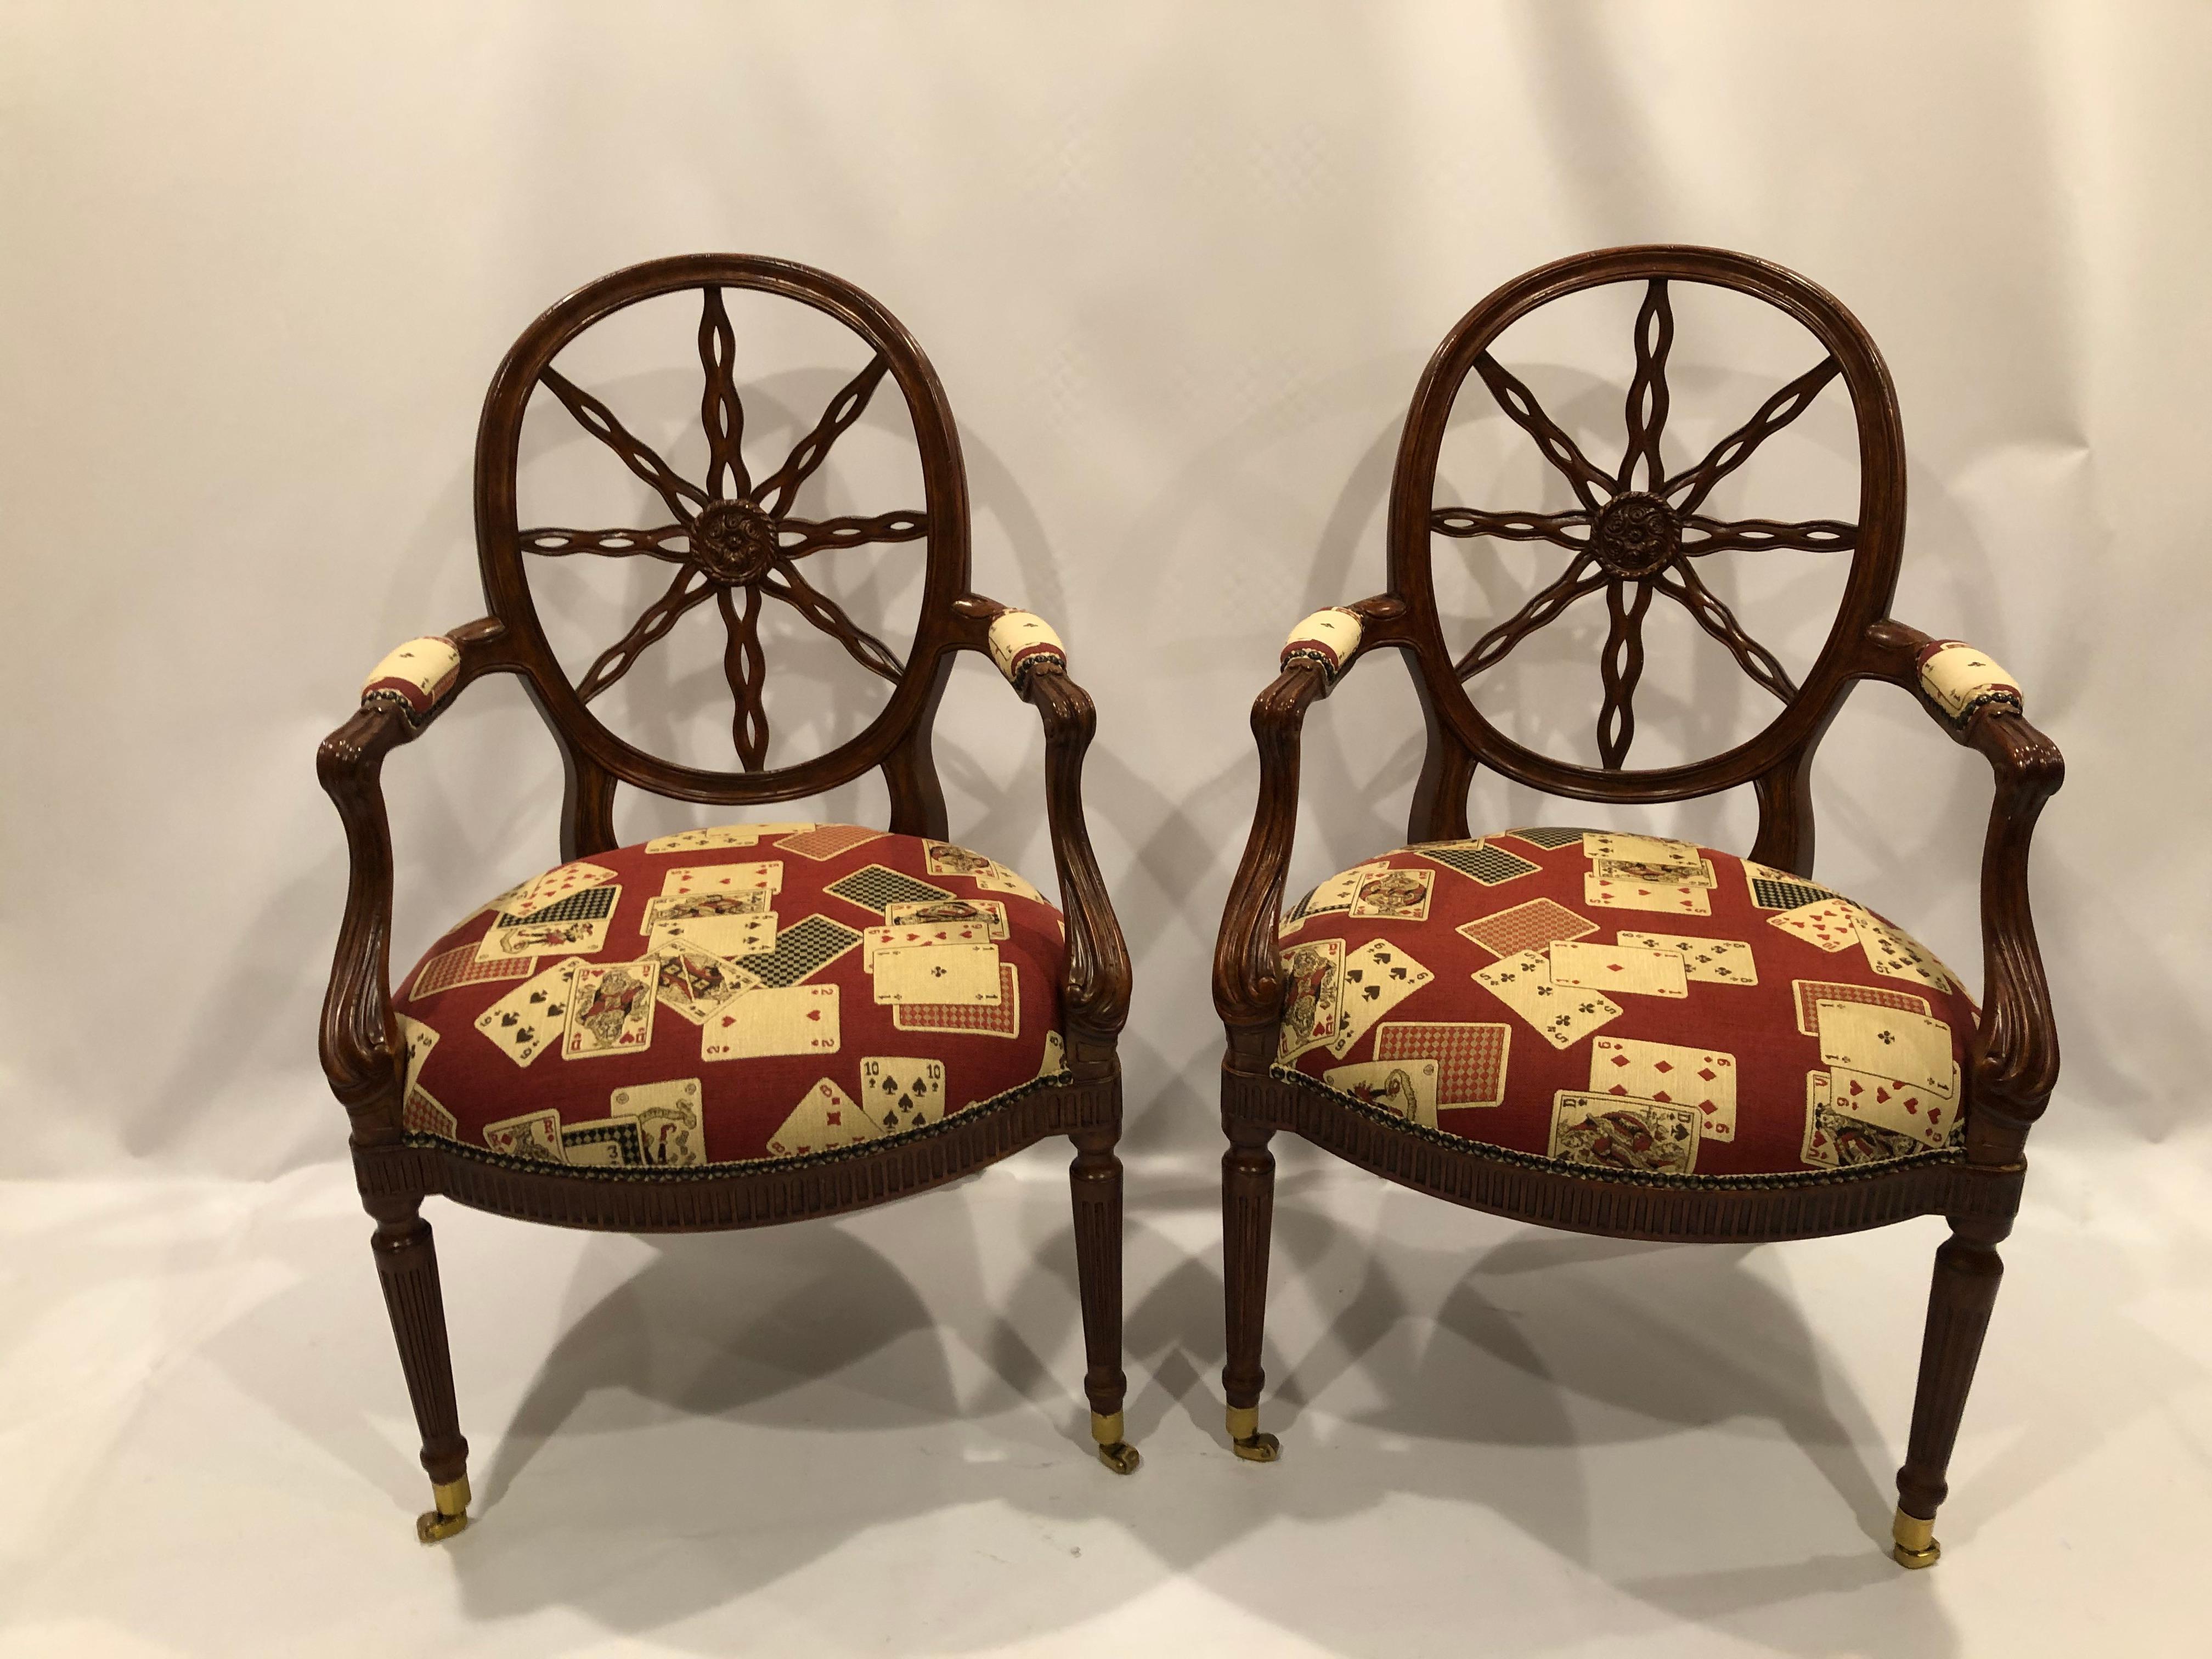 Handsome beautifully made set of 4 carved wood armchairs having marvelous sunburst motife backs and game table appropriate playing cards upholstery.
Great details like brass nailheads and casters and plush upholstered arm rests.
Measures: arm